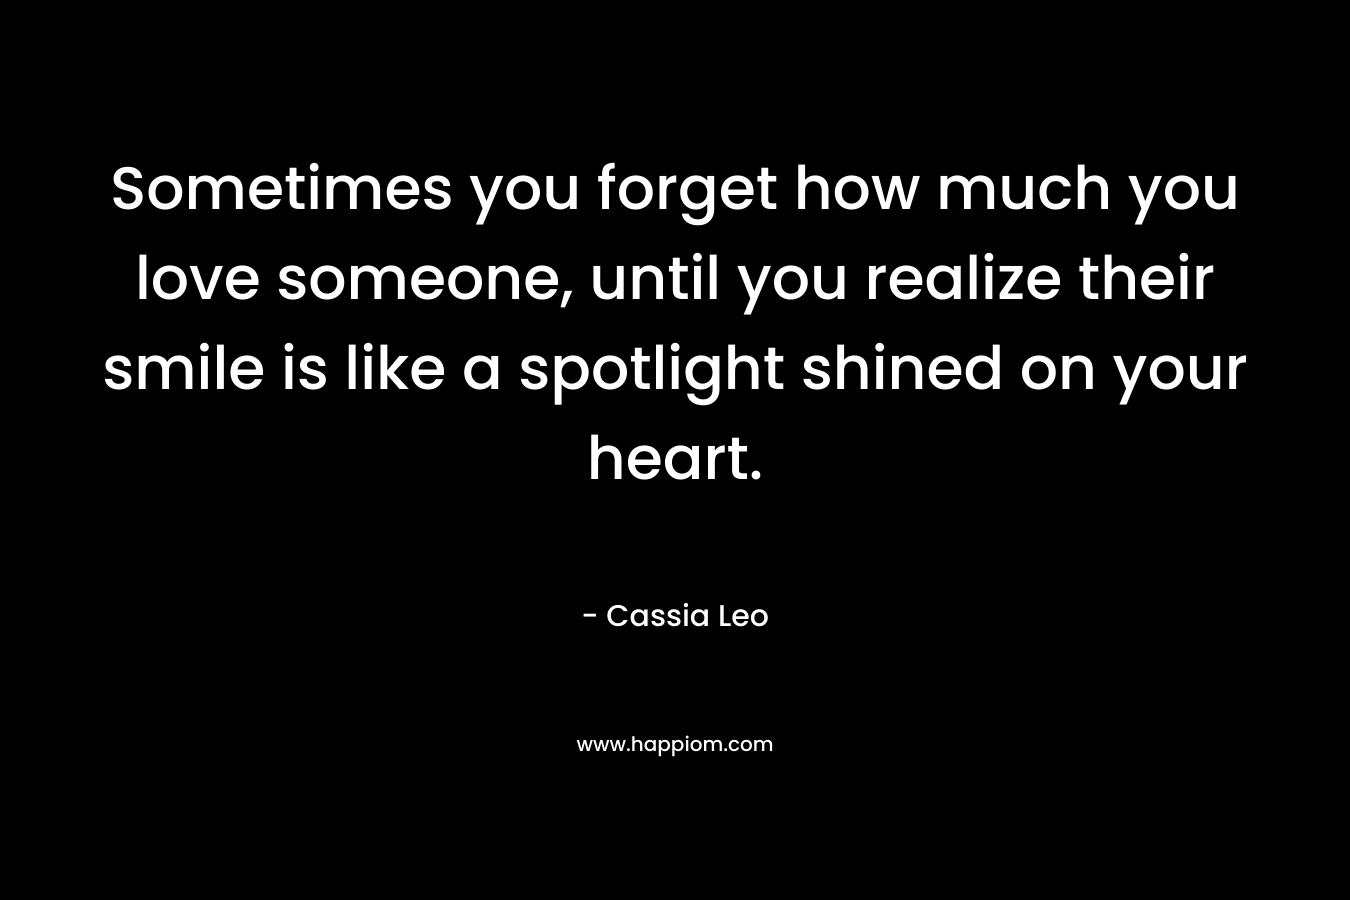 Sometimes you forget how much you love someone, until you realize their smile is like a spotlight shined on your heart. – Cassia Leo